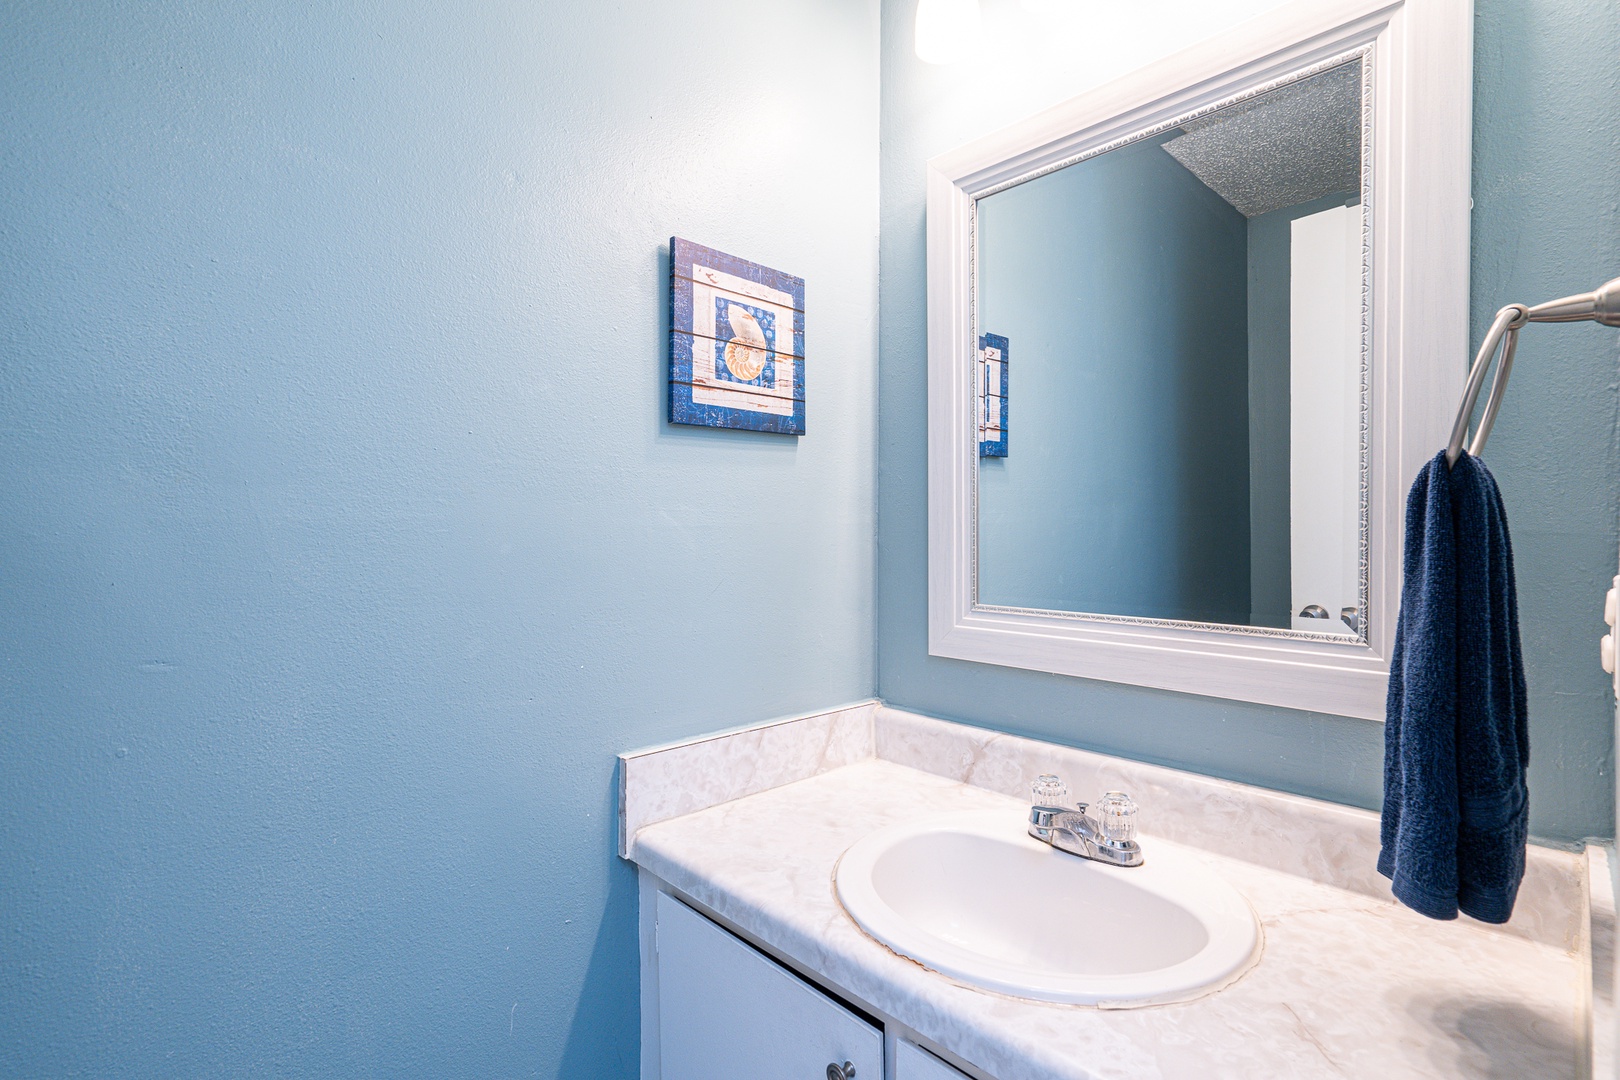 A convenient half bath is available just off the entryway